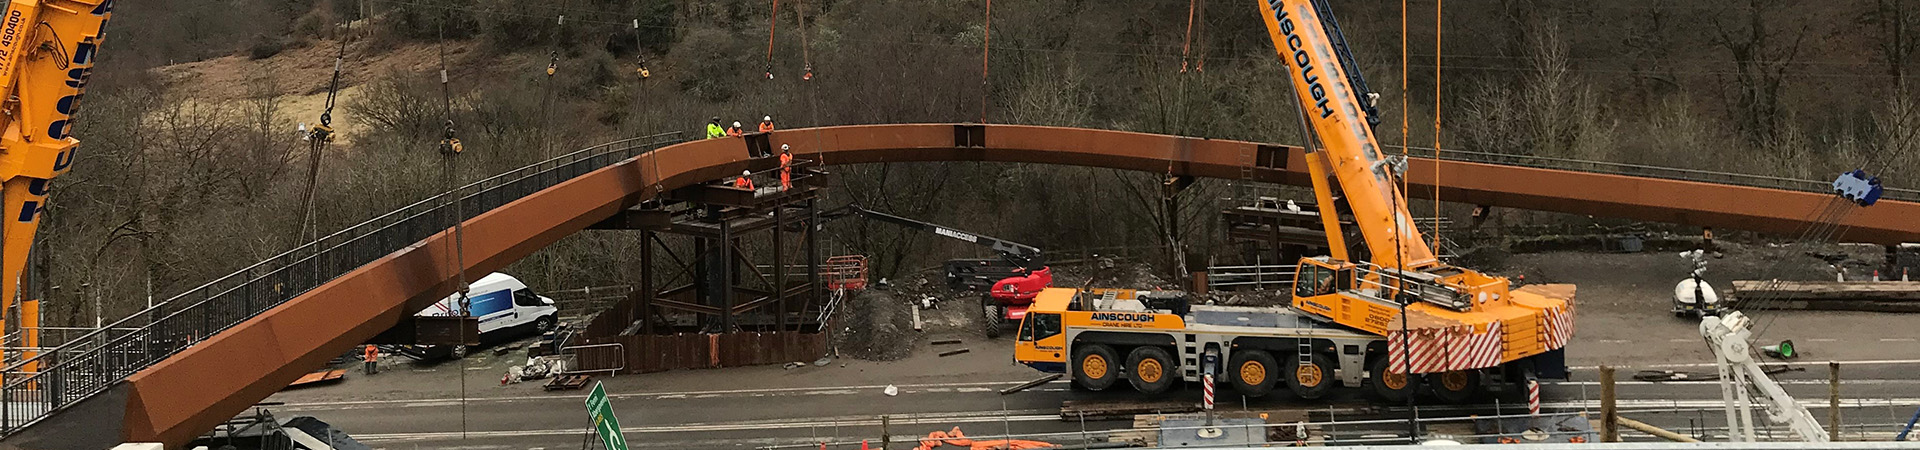 A steel footbridge being craned into position